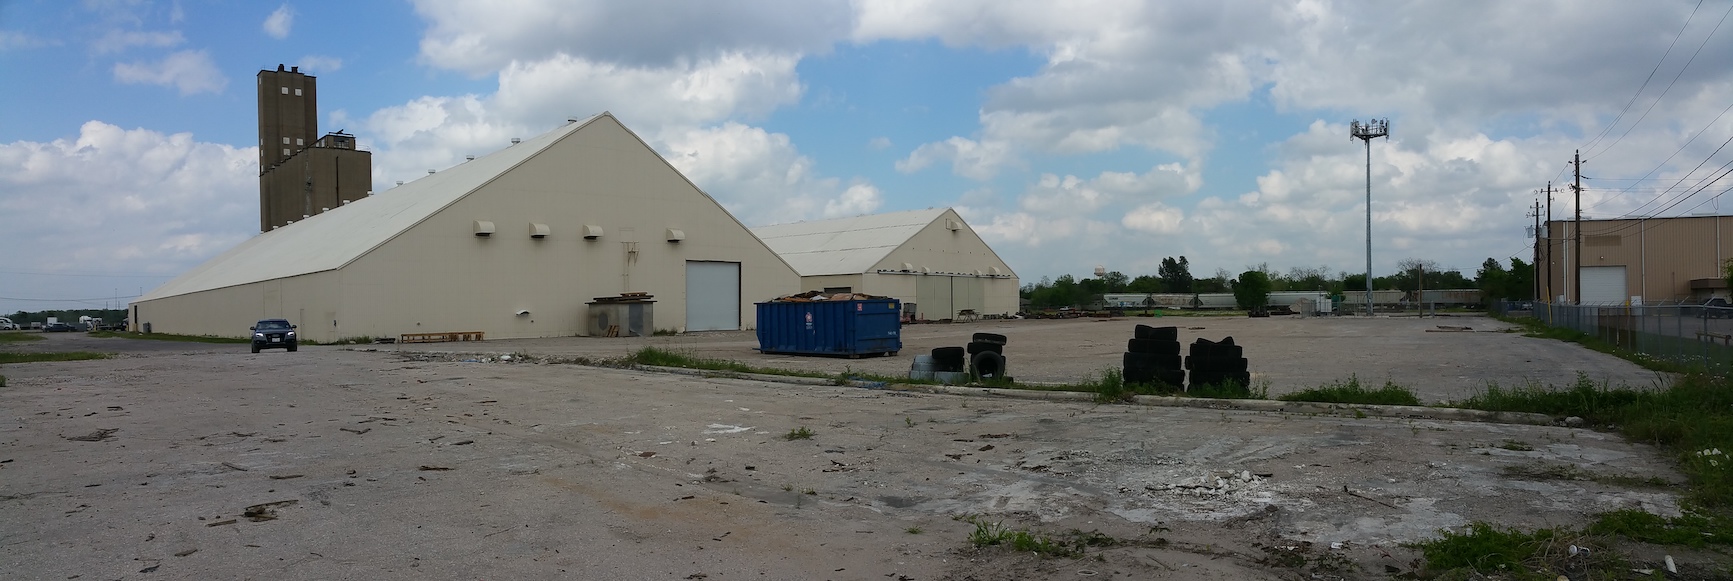 4800 Fidelity - South end of 54,000 SF and its yard area